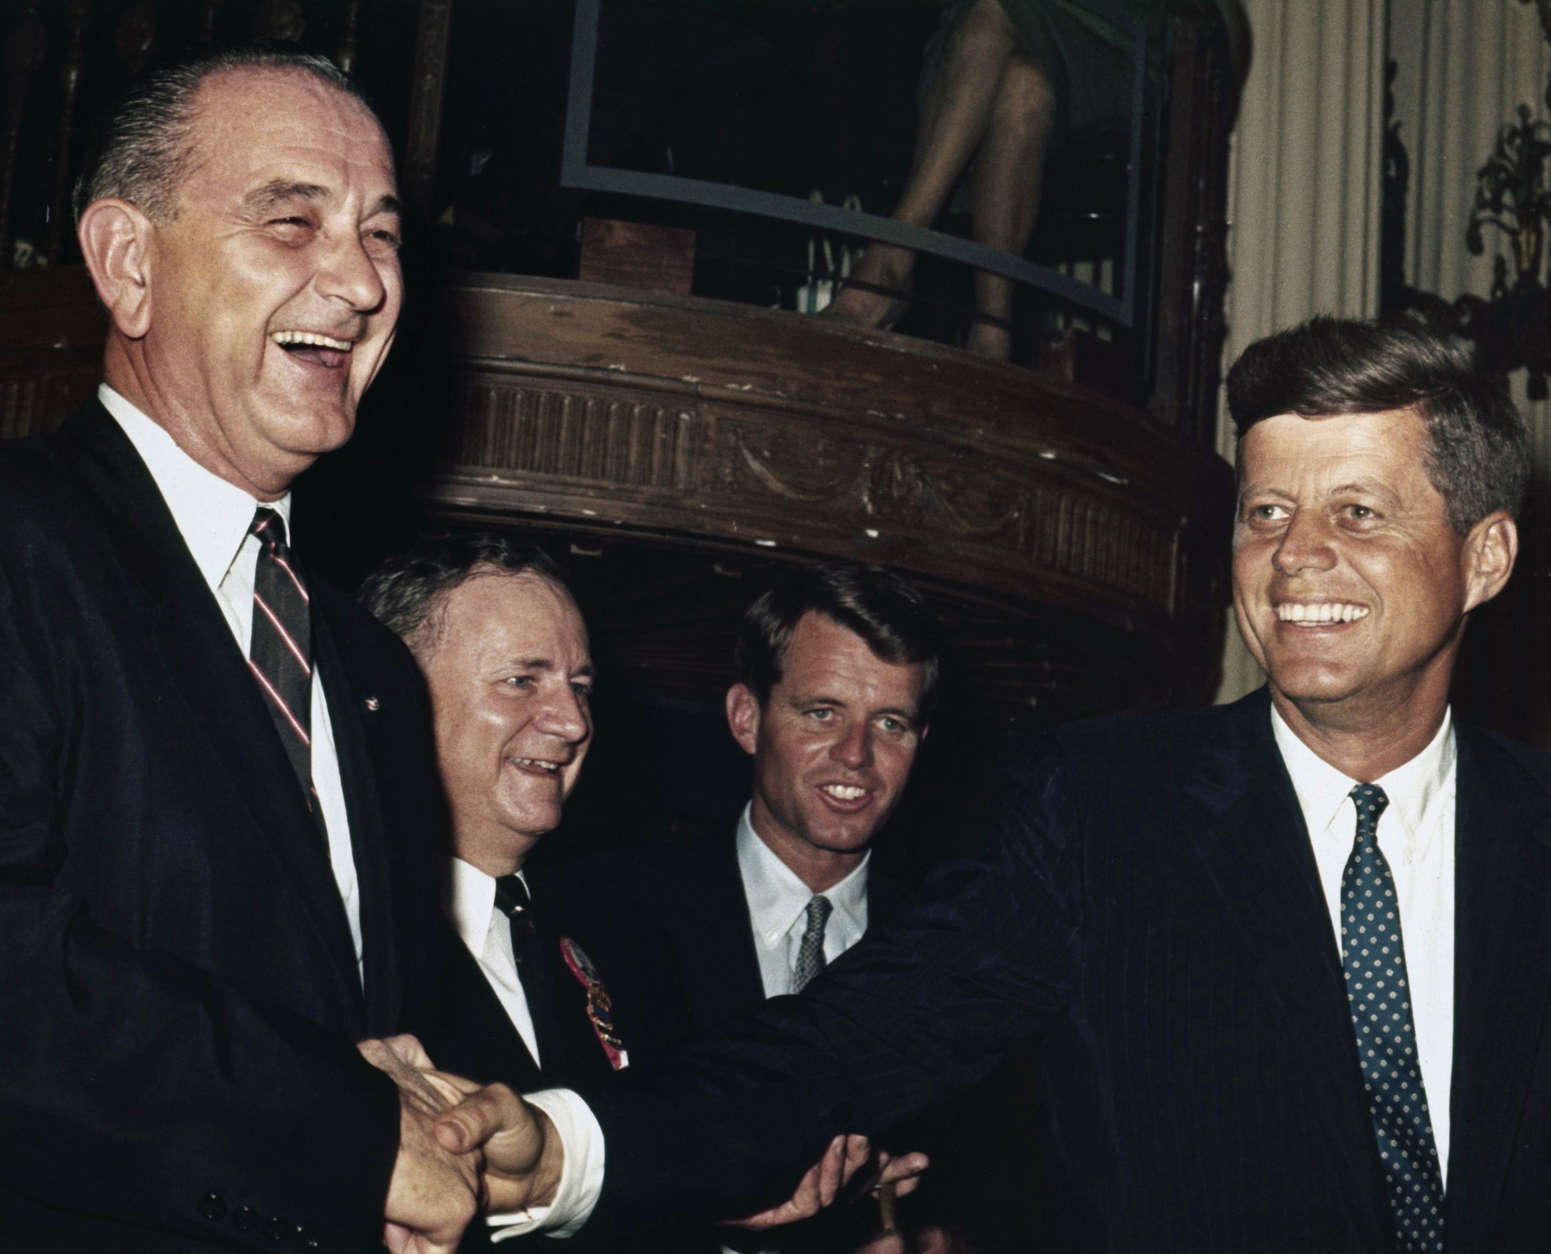 John F. Kennedy, at right,  stands with Lyndon Baines Johnson before the Texas delegation caucus in Los Angeles July 12, 1960 prior to the Democratic Convention.   Both Senators are Democratic contenders for the Presidential nomination.  Behind Senator Kennedy is his brother Robert F. Kennedy, his campaign manager.  Man behind Senator Johnson at left rear is unidentified.  (AP Photo)